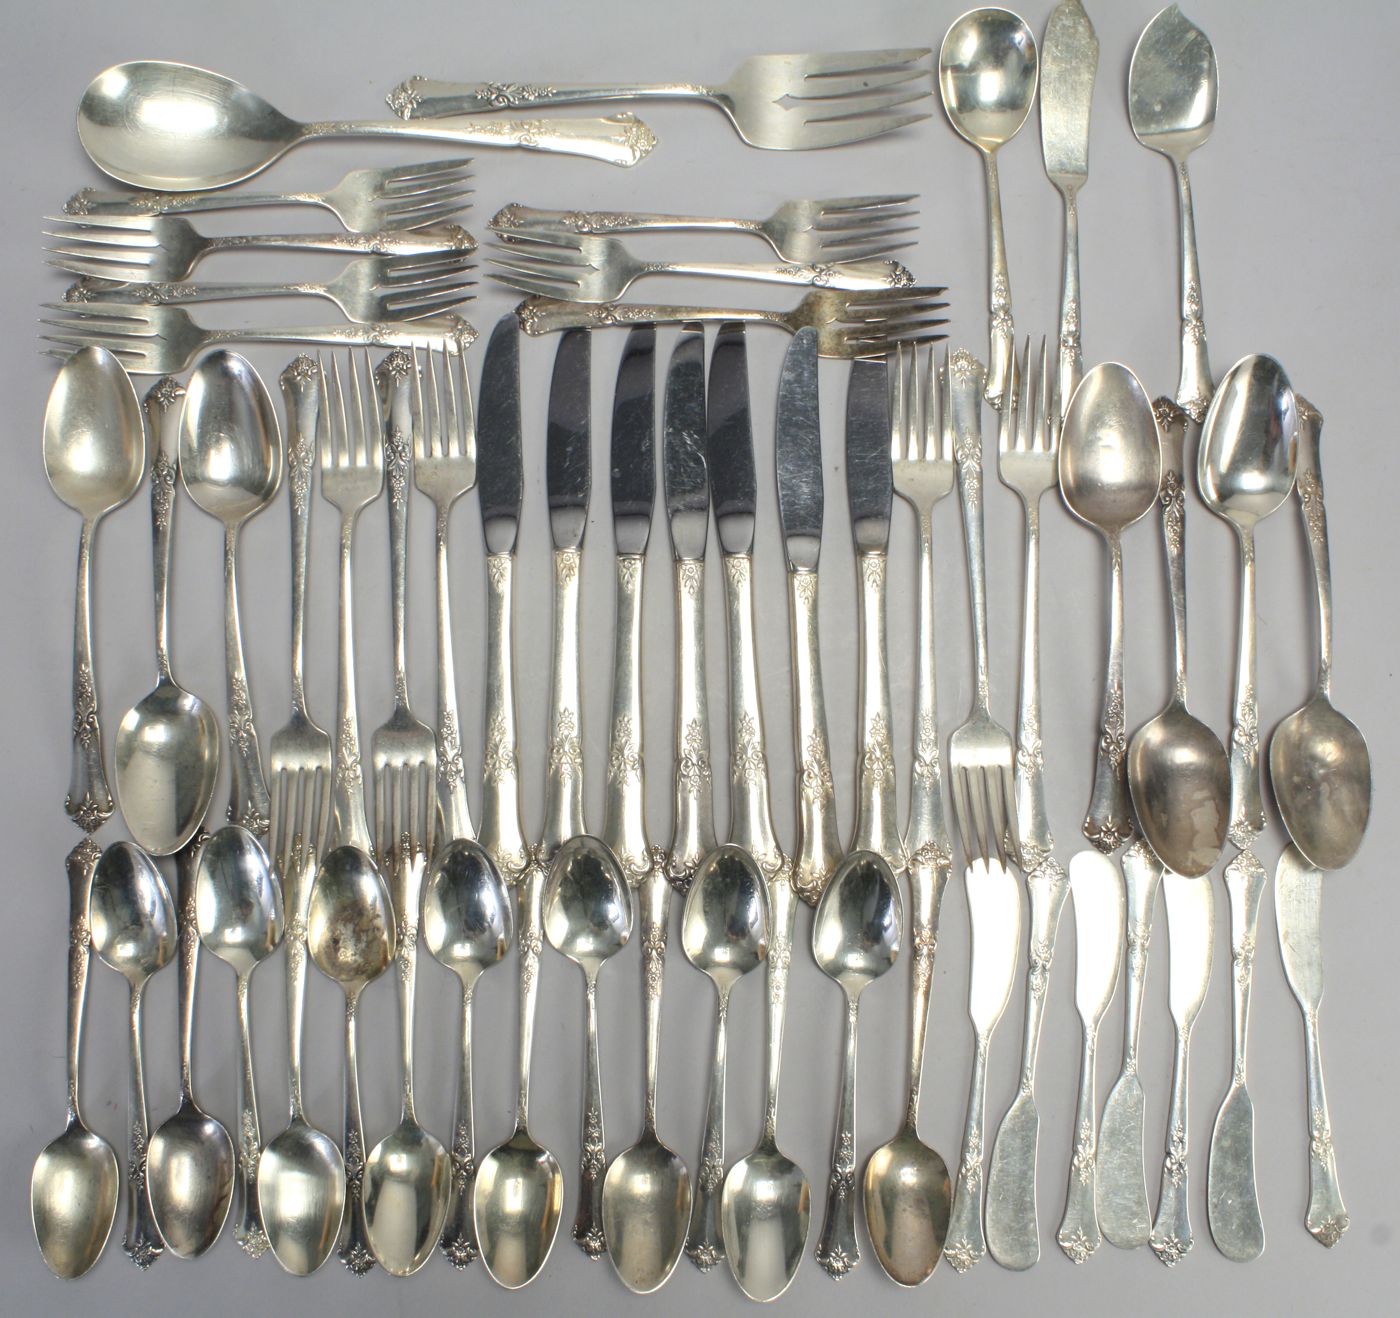 STATE HOUSE SILVER COMPANY STERLING 14a71e